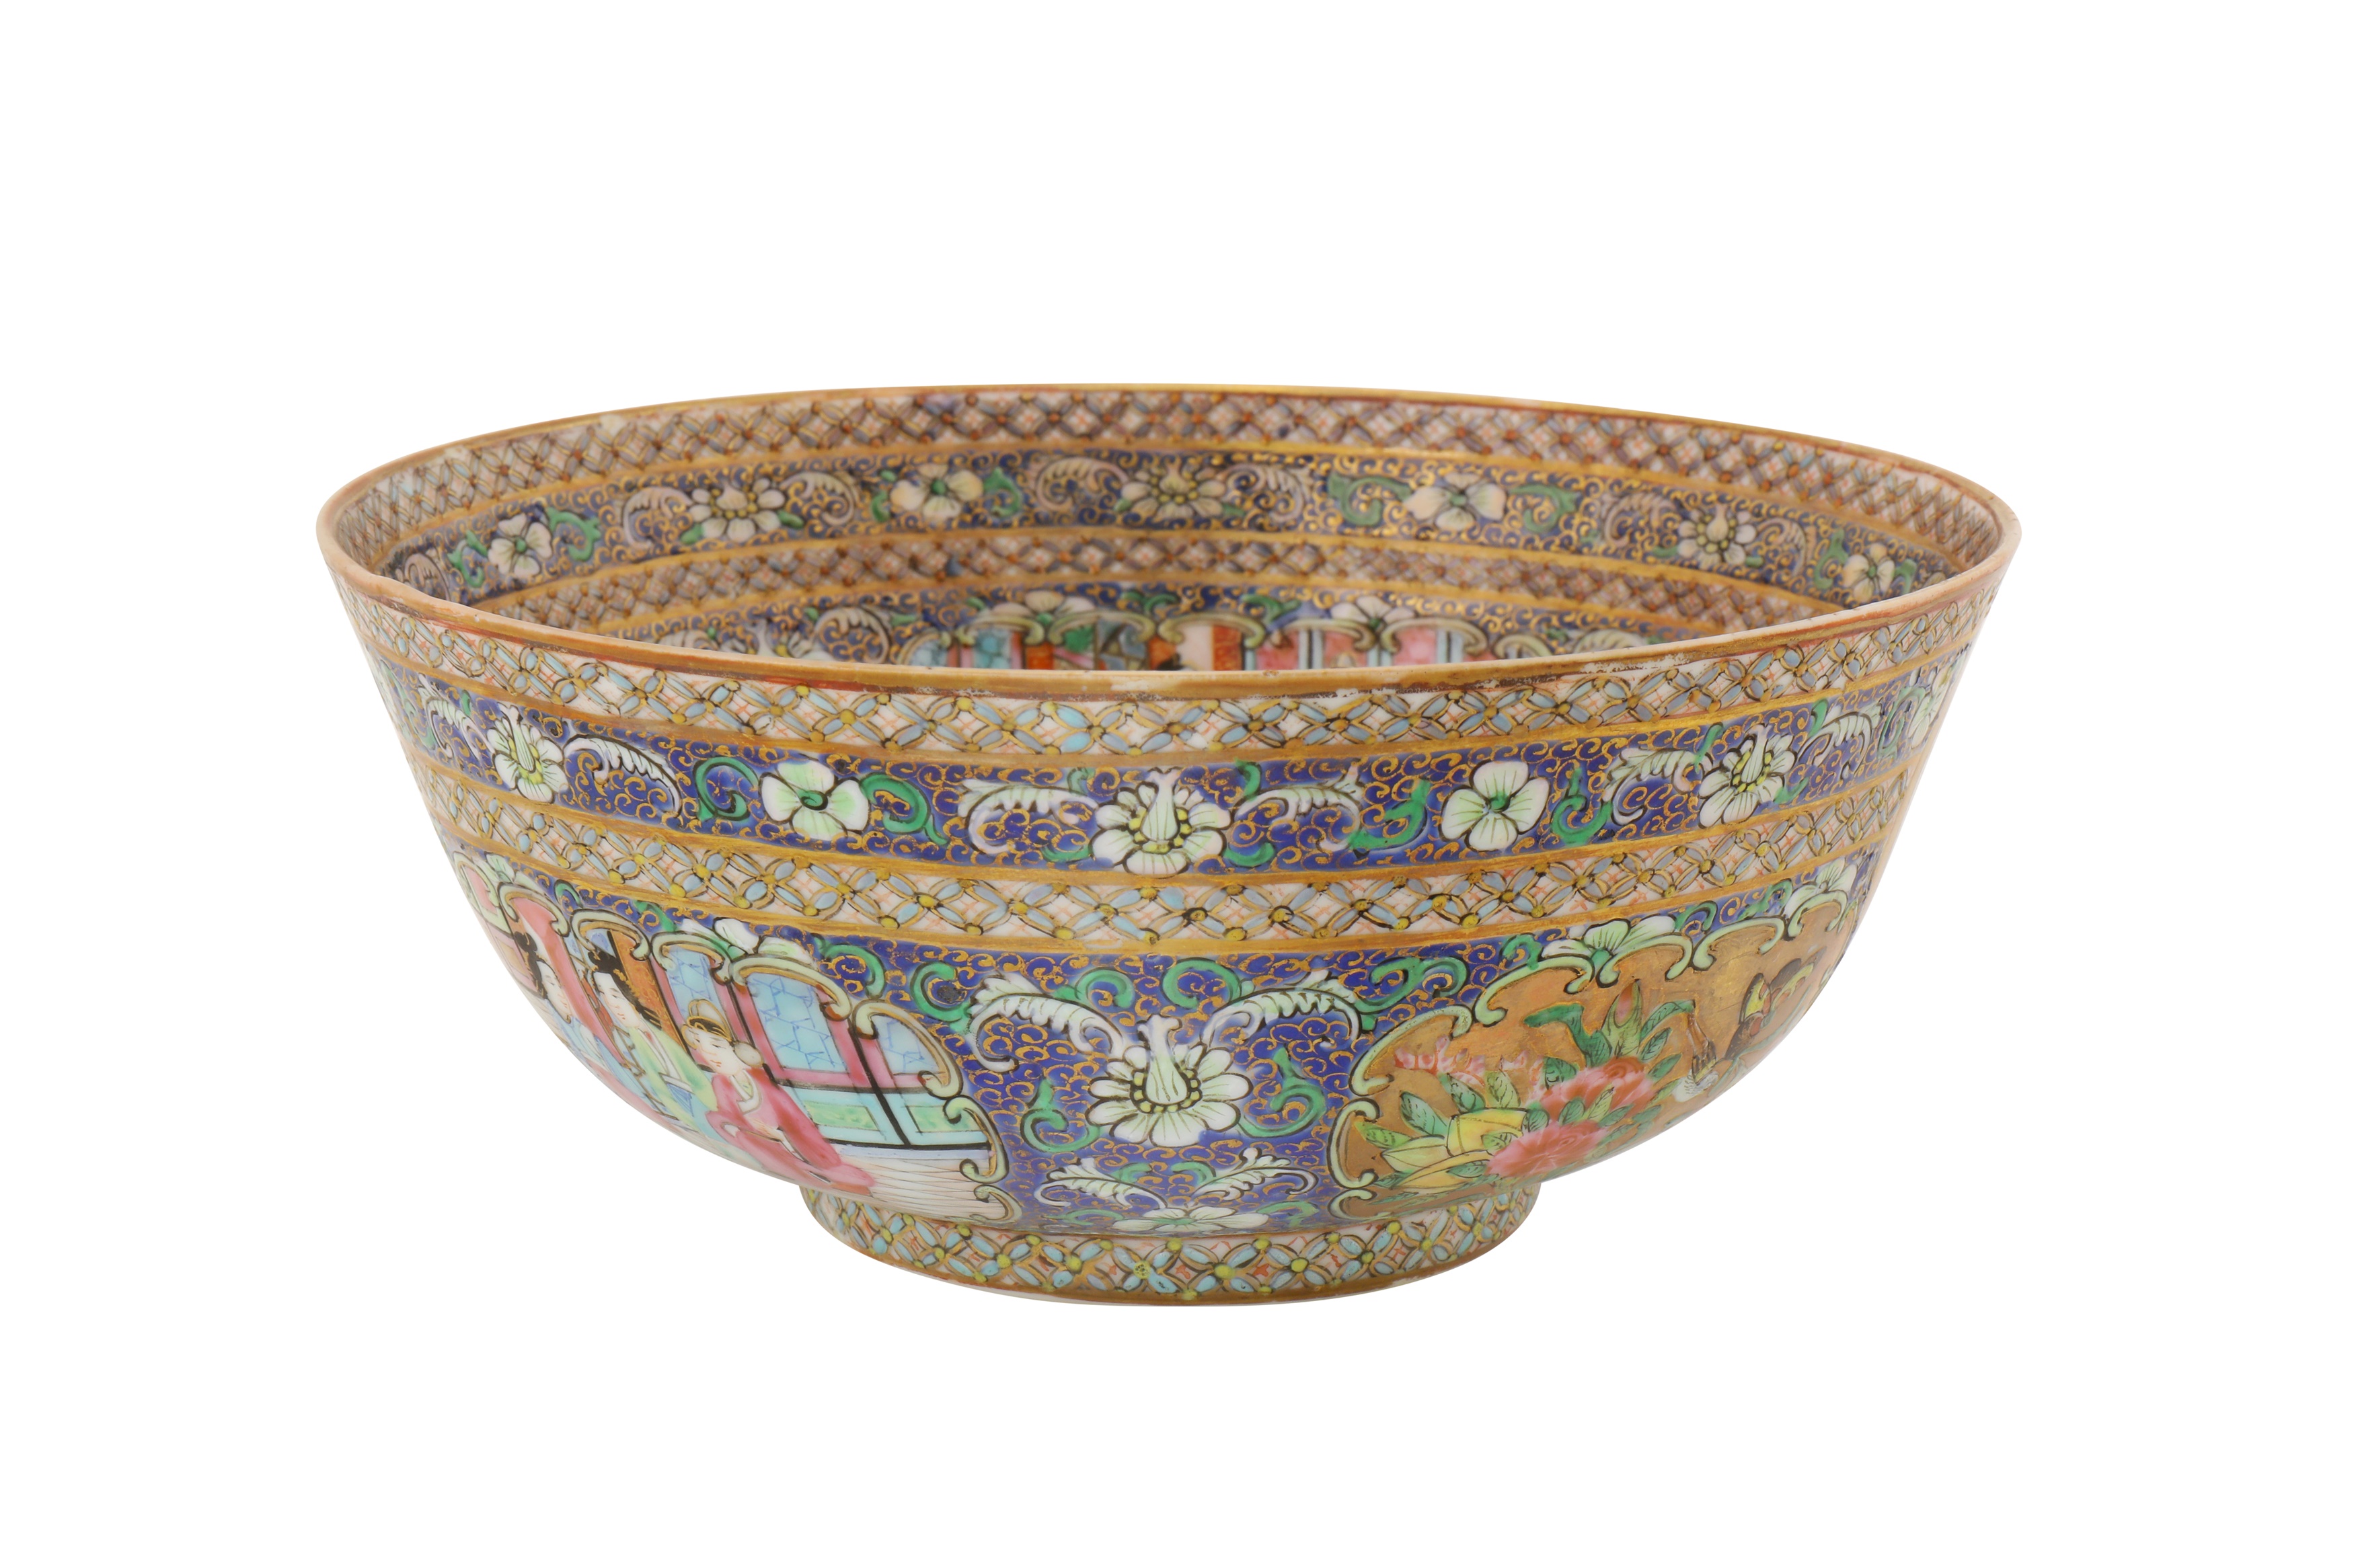 A MEDIUM-SIZED BOWL AND DISH AND SMALLER BOWL FROM THE ZILL AL-SULTAN CANTON PORCELAIN SERVICE - Image 9 of 17